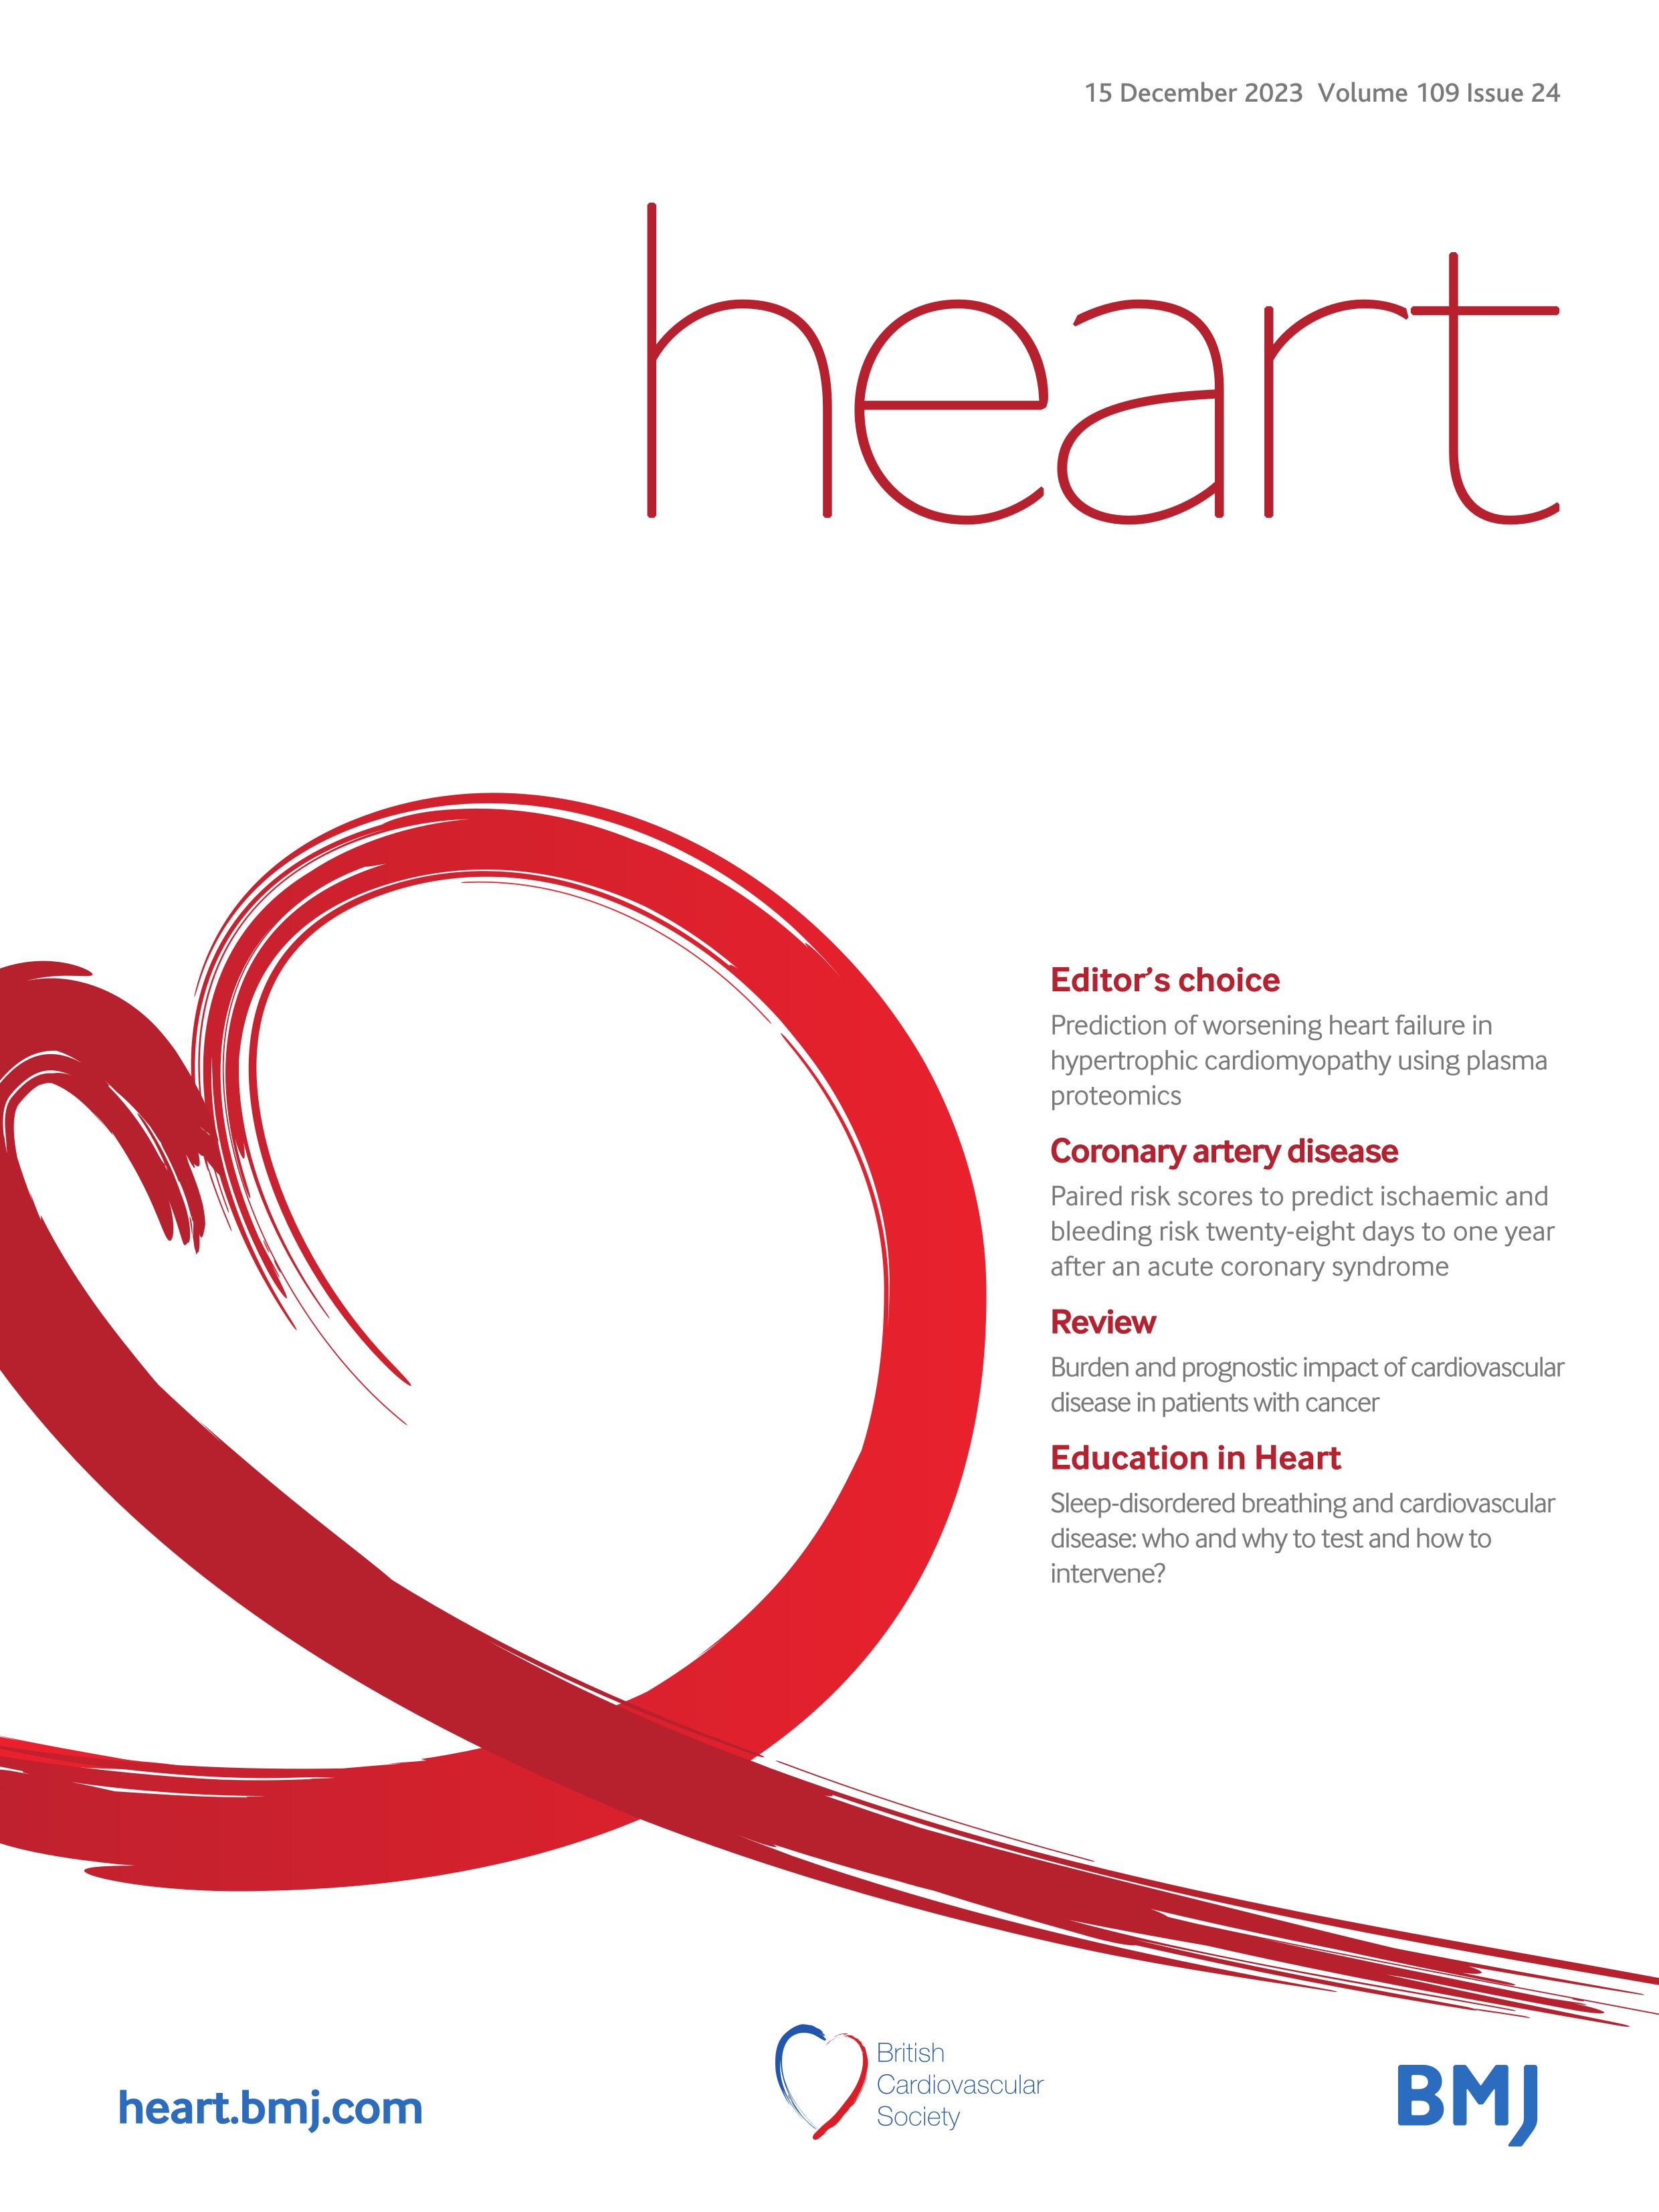 Paired risk scores to predict ischaemic and bleeding risk twenty-eight days to one year after an acute coronary syndrome